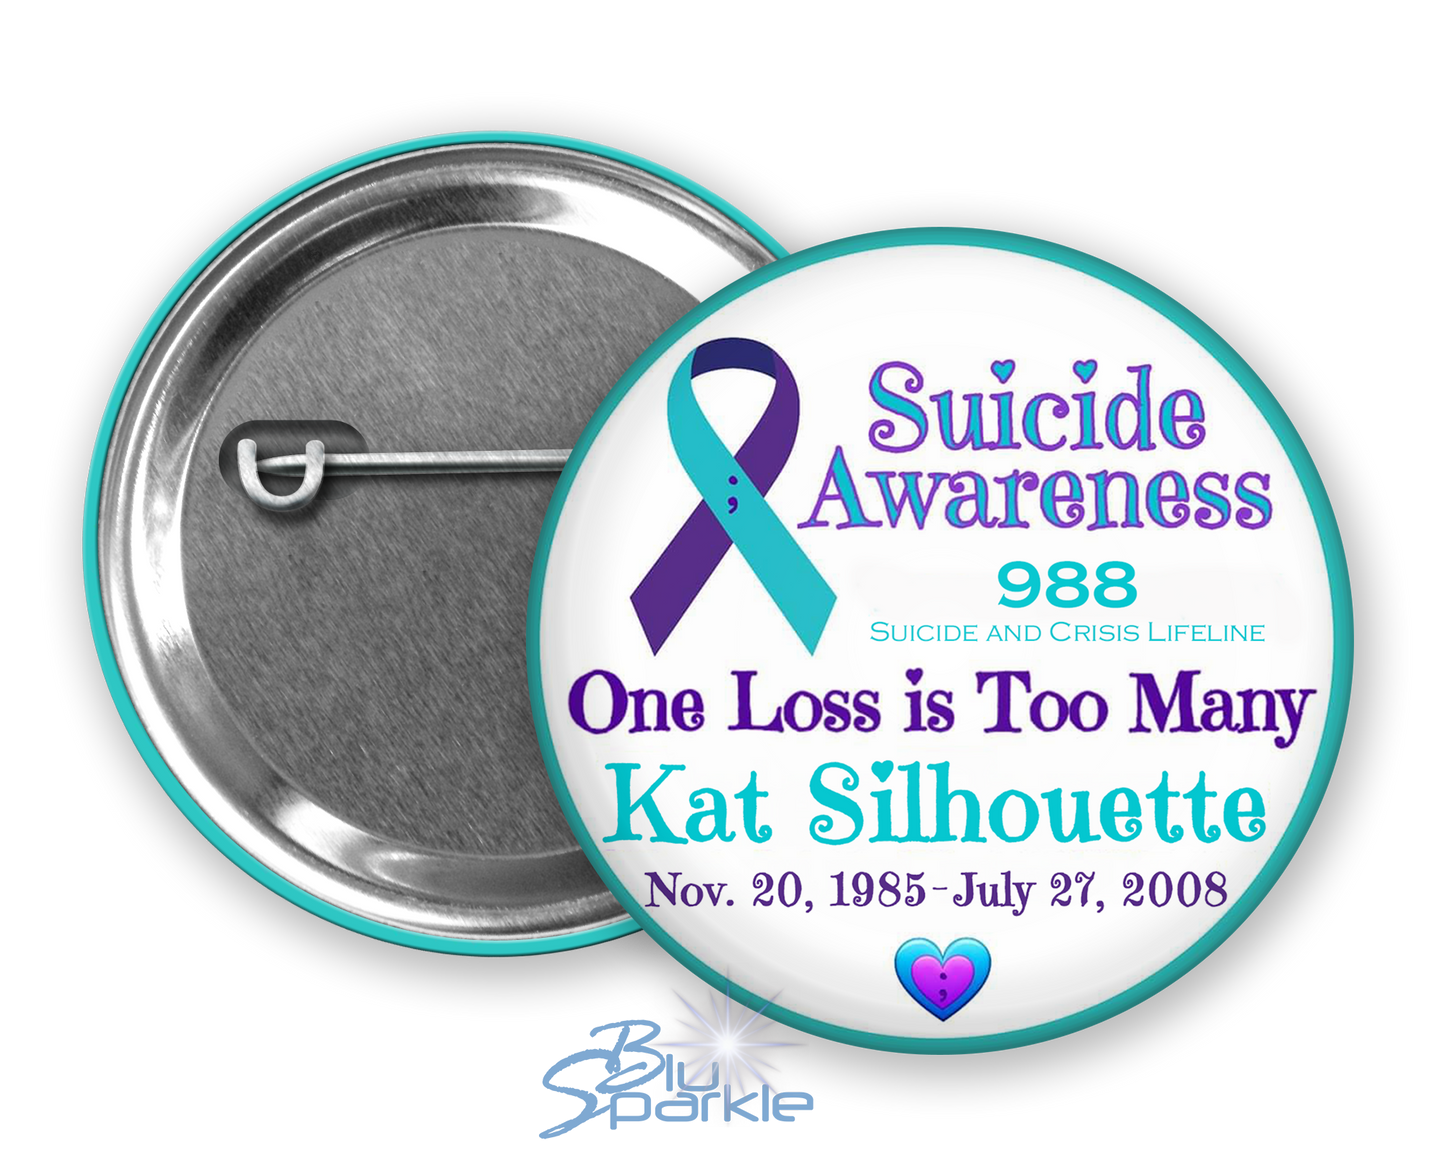 Personalized "Suicide Awareness One Loss is Too Many" Pinback Buttons